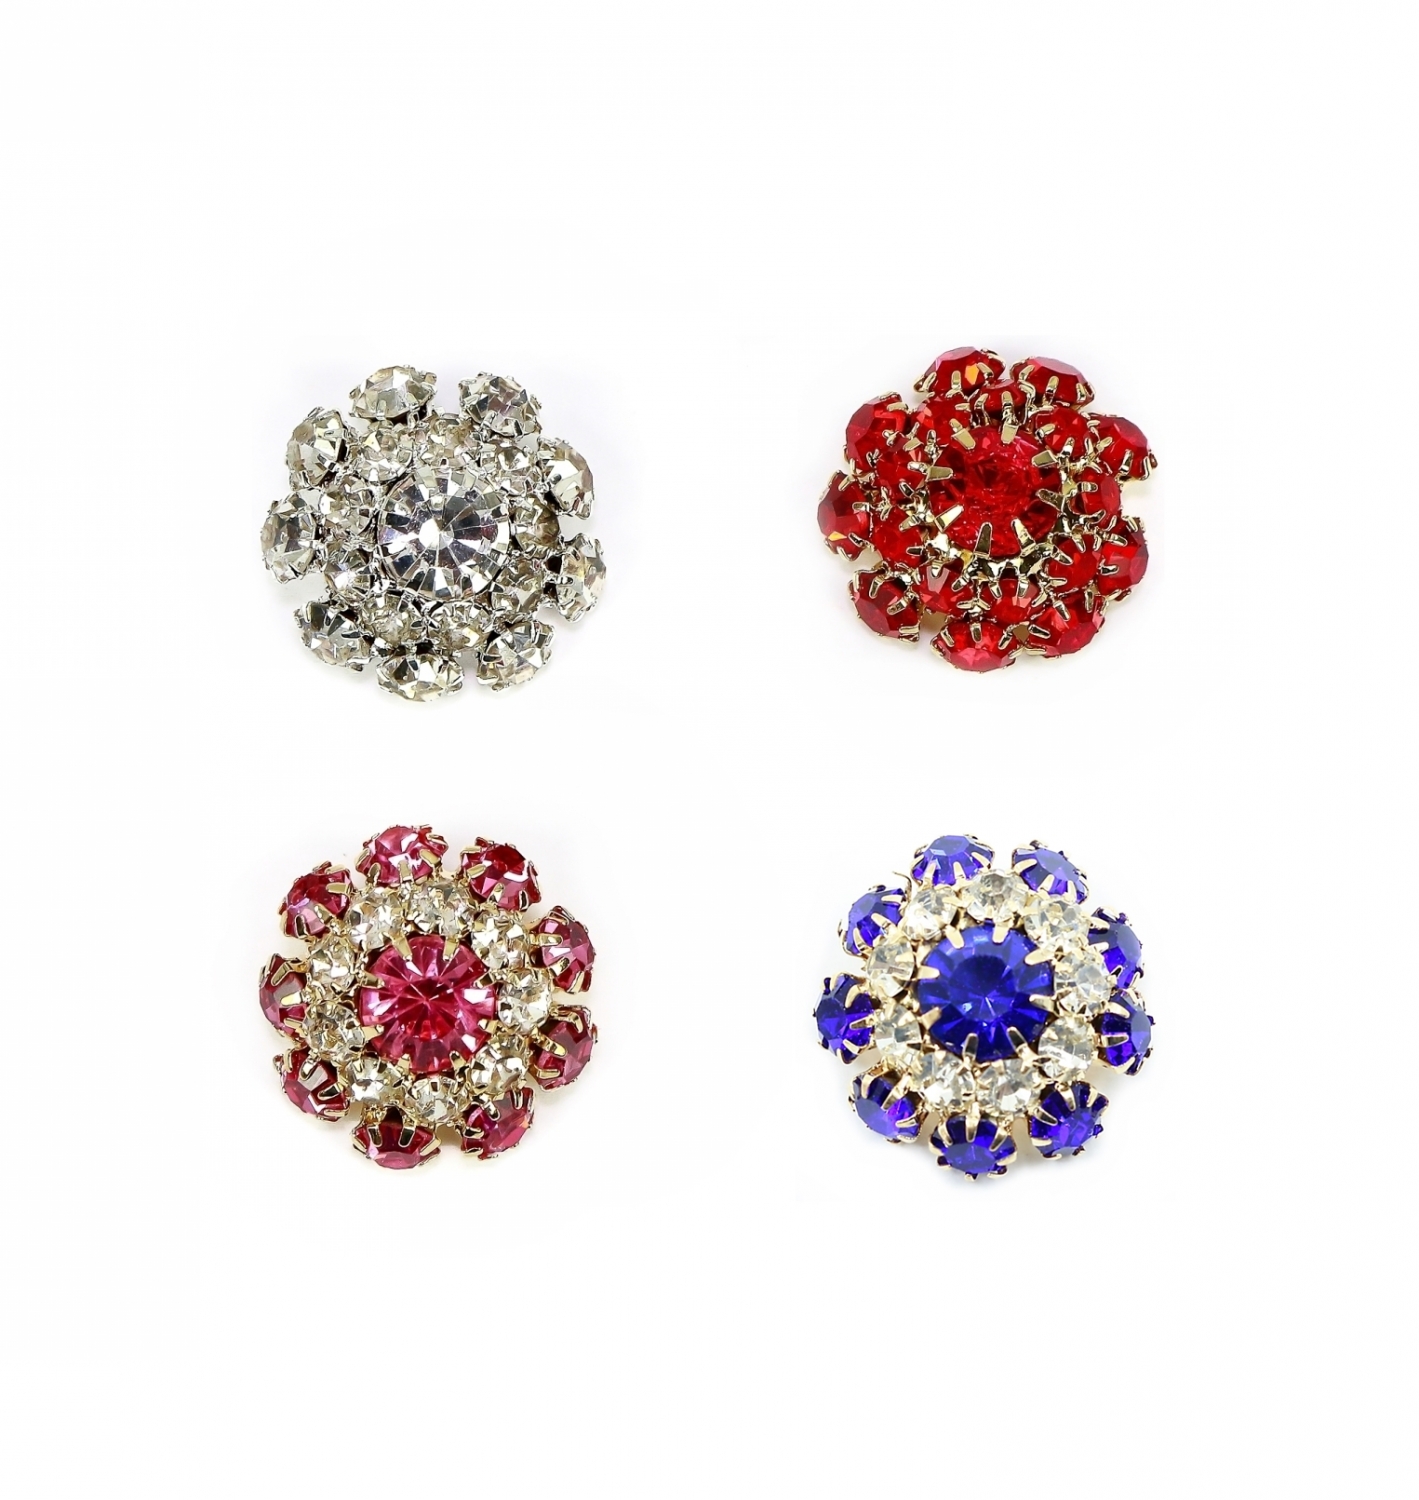 Shank Buttons with Rhinestones and Beads, 2cm (10 pcs/pack) Code: BT0844